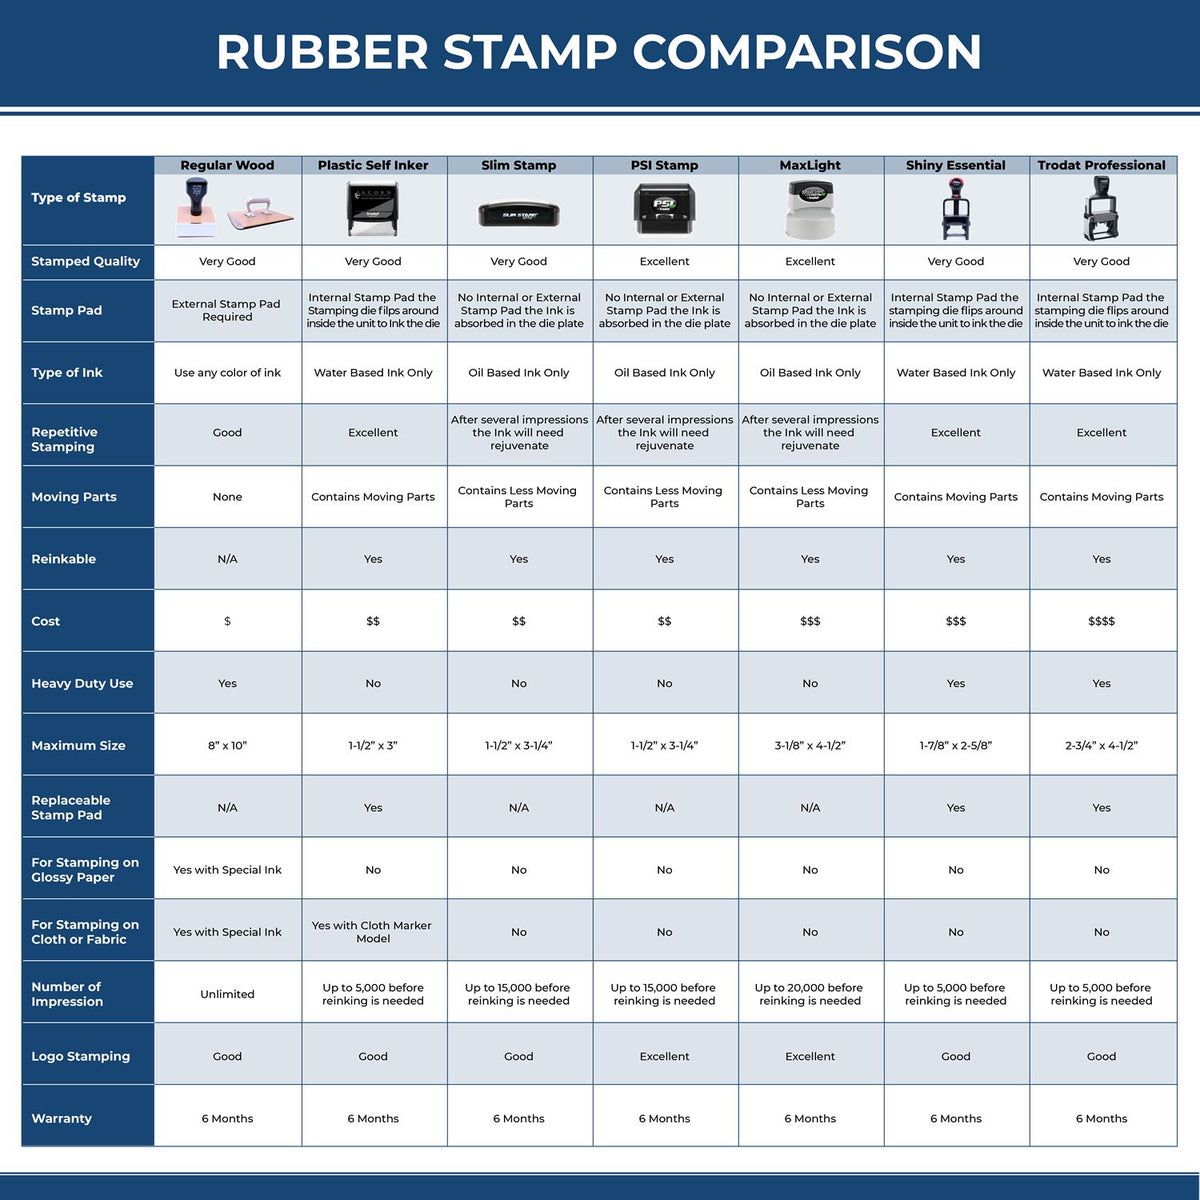 A comparison chart for the different types of mount models available for the Slim Pre-Inked Guam Professional Engineer Seal Stamp.